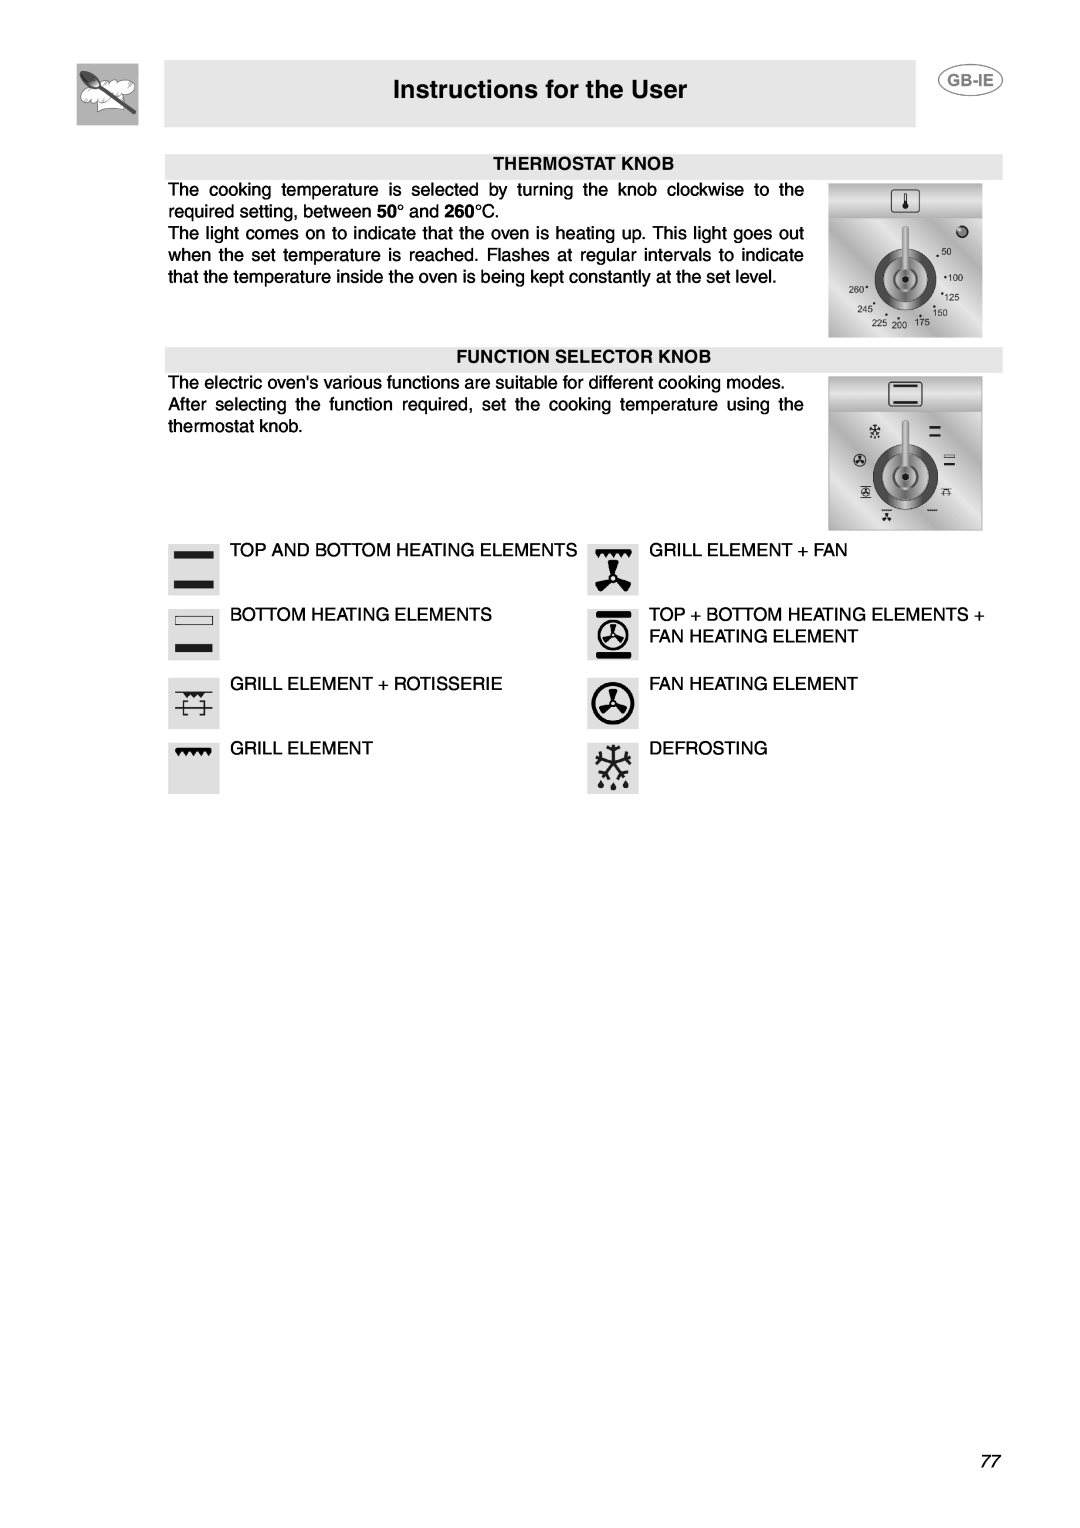 Smeg B70CMSX5 manual Thermostat Knob, Function Selector Knob, Instructions for the User 